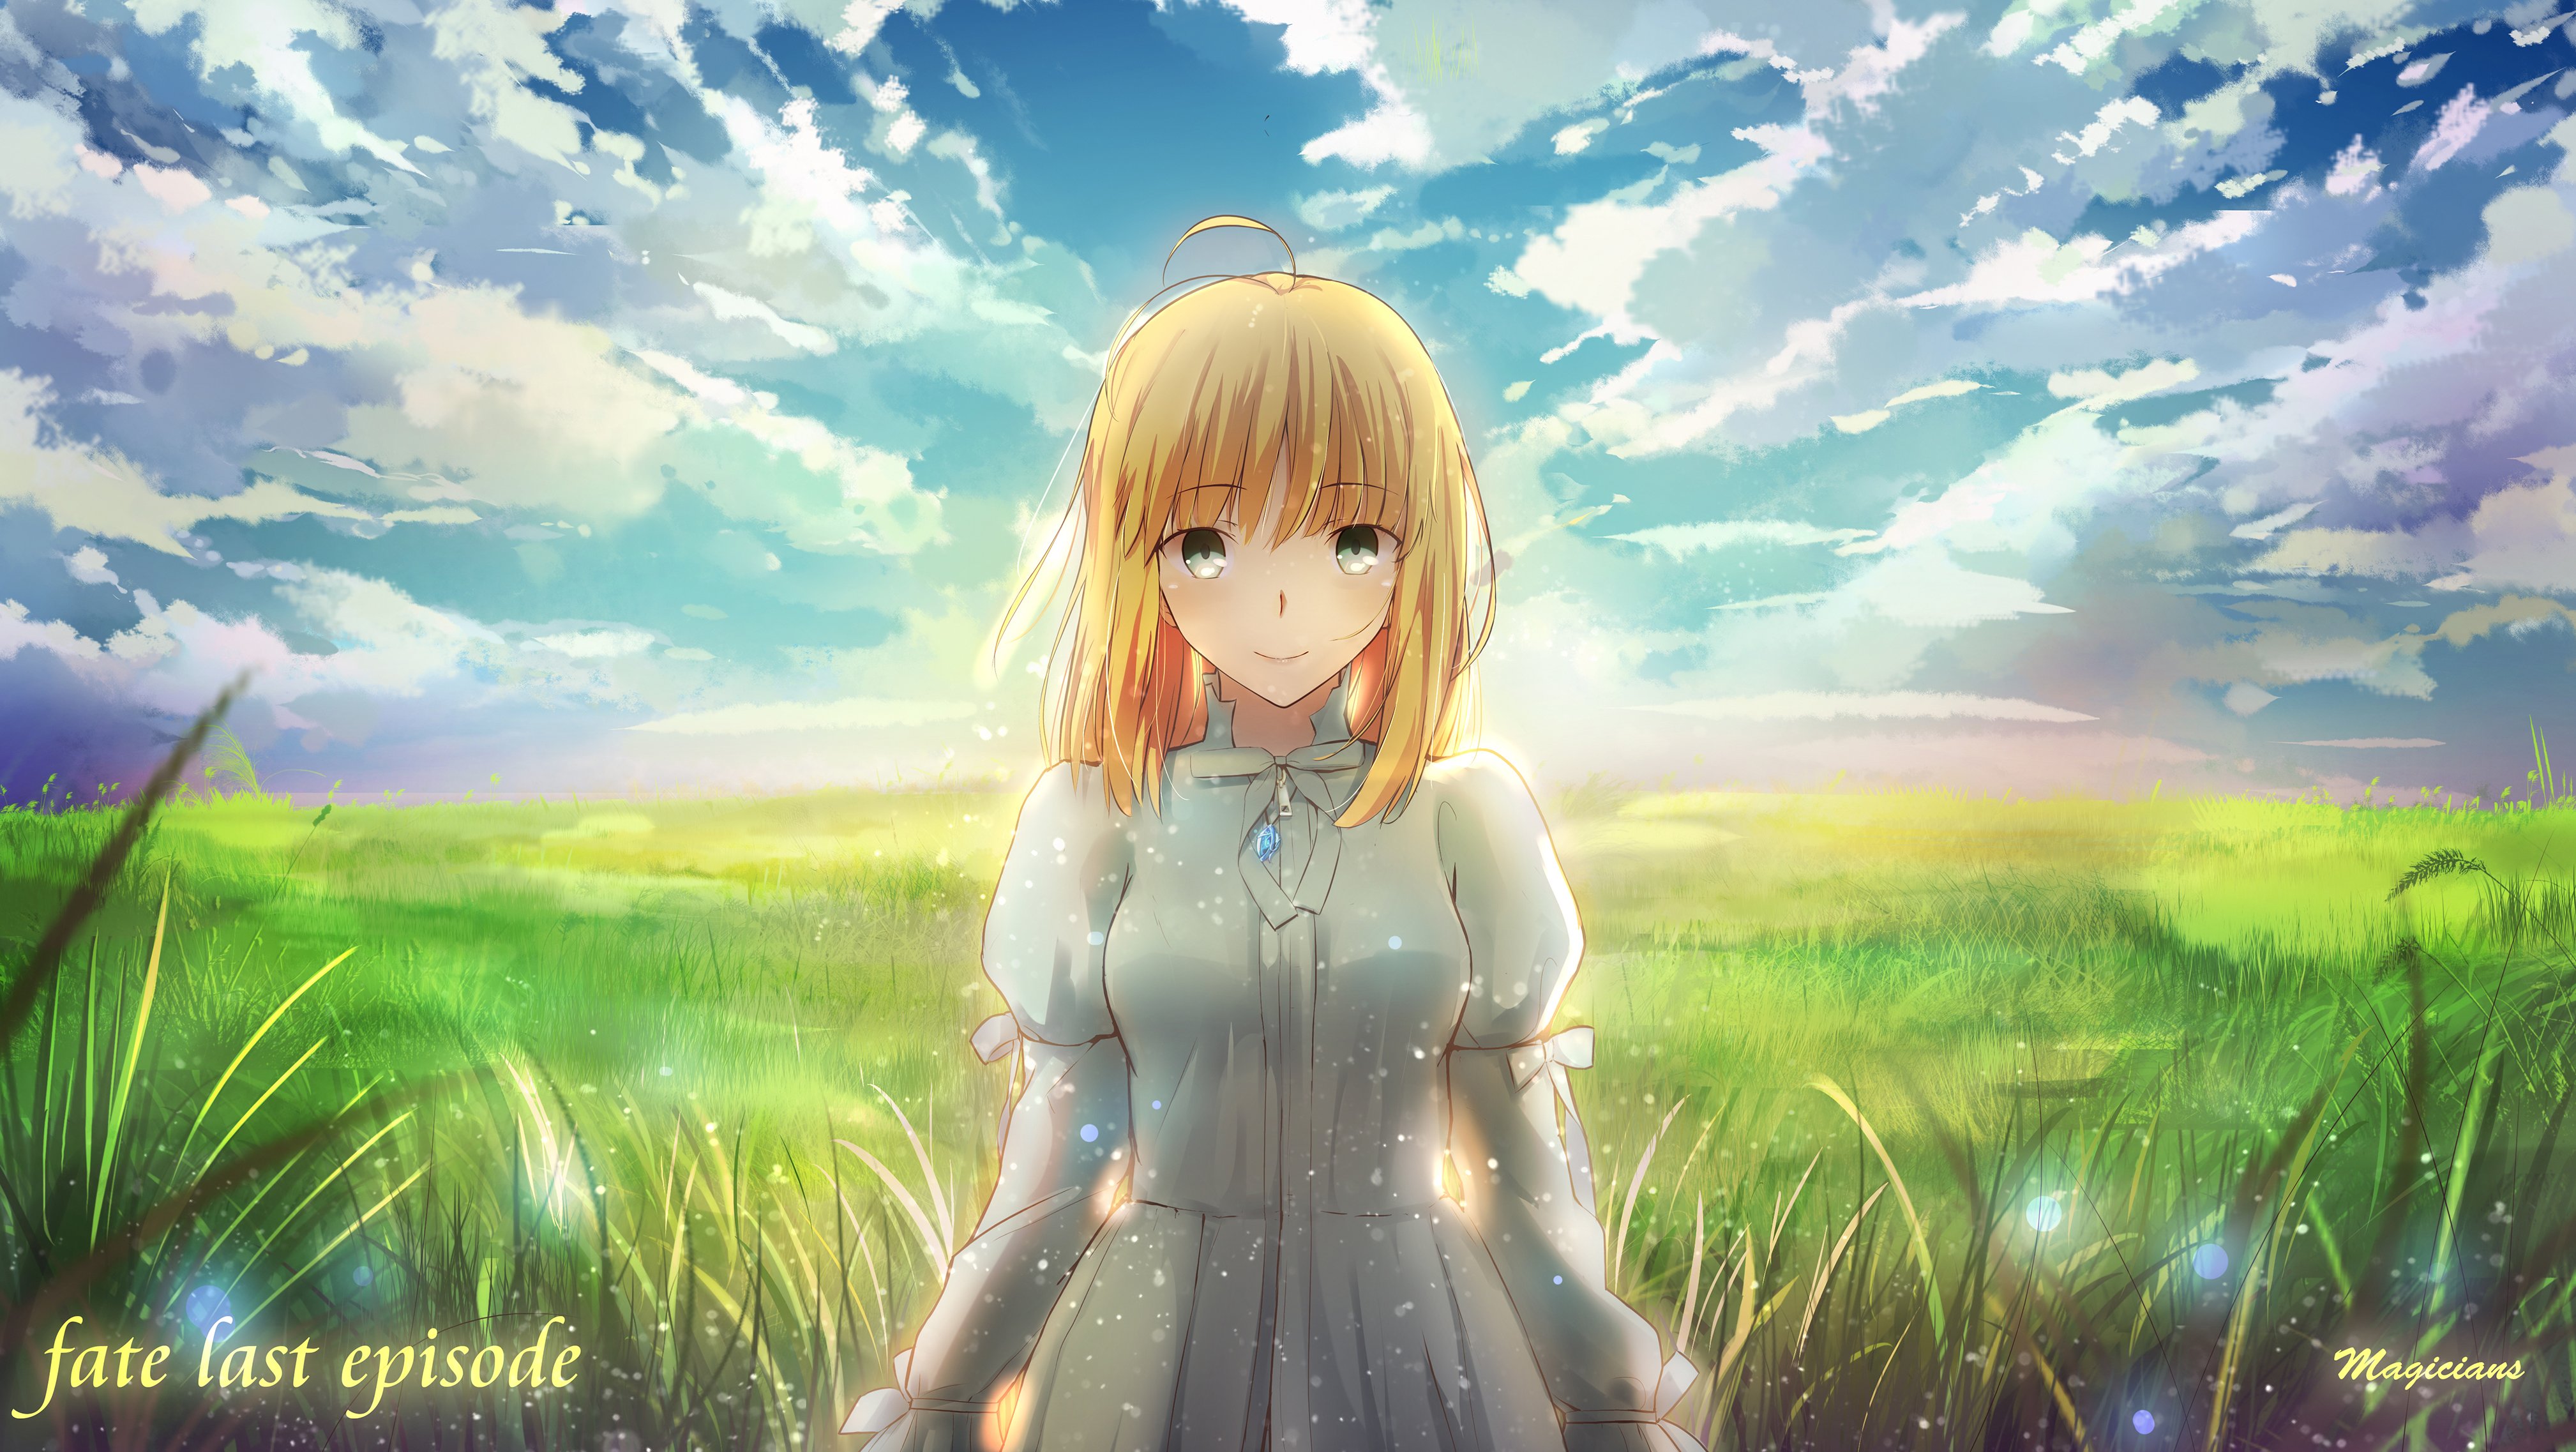 blonde, Hair, Clouds, Dress, Fate, Stay, Night, Grass, Green, Eyes, Landscape, Magicians, Saber, Scenic, Signed, Sky Wallpaper